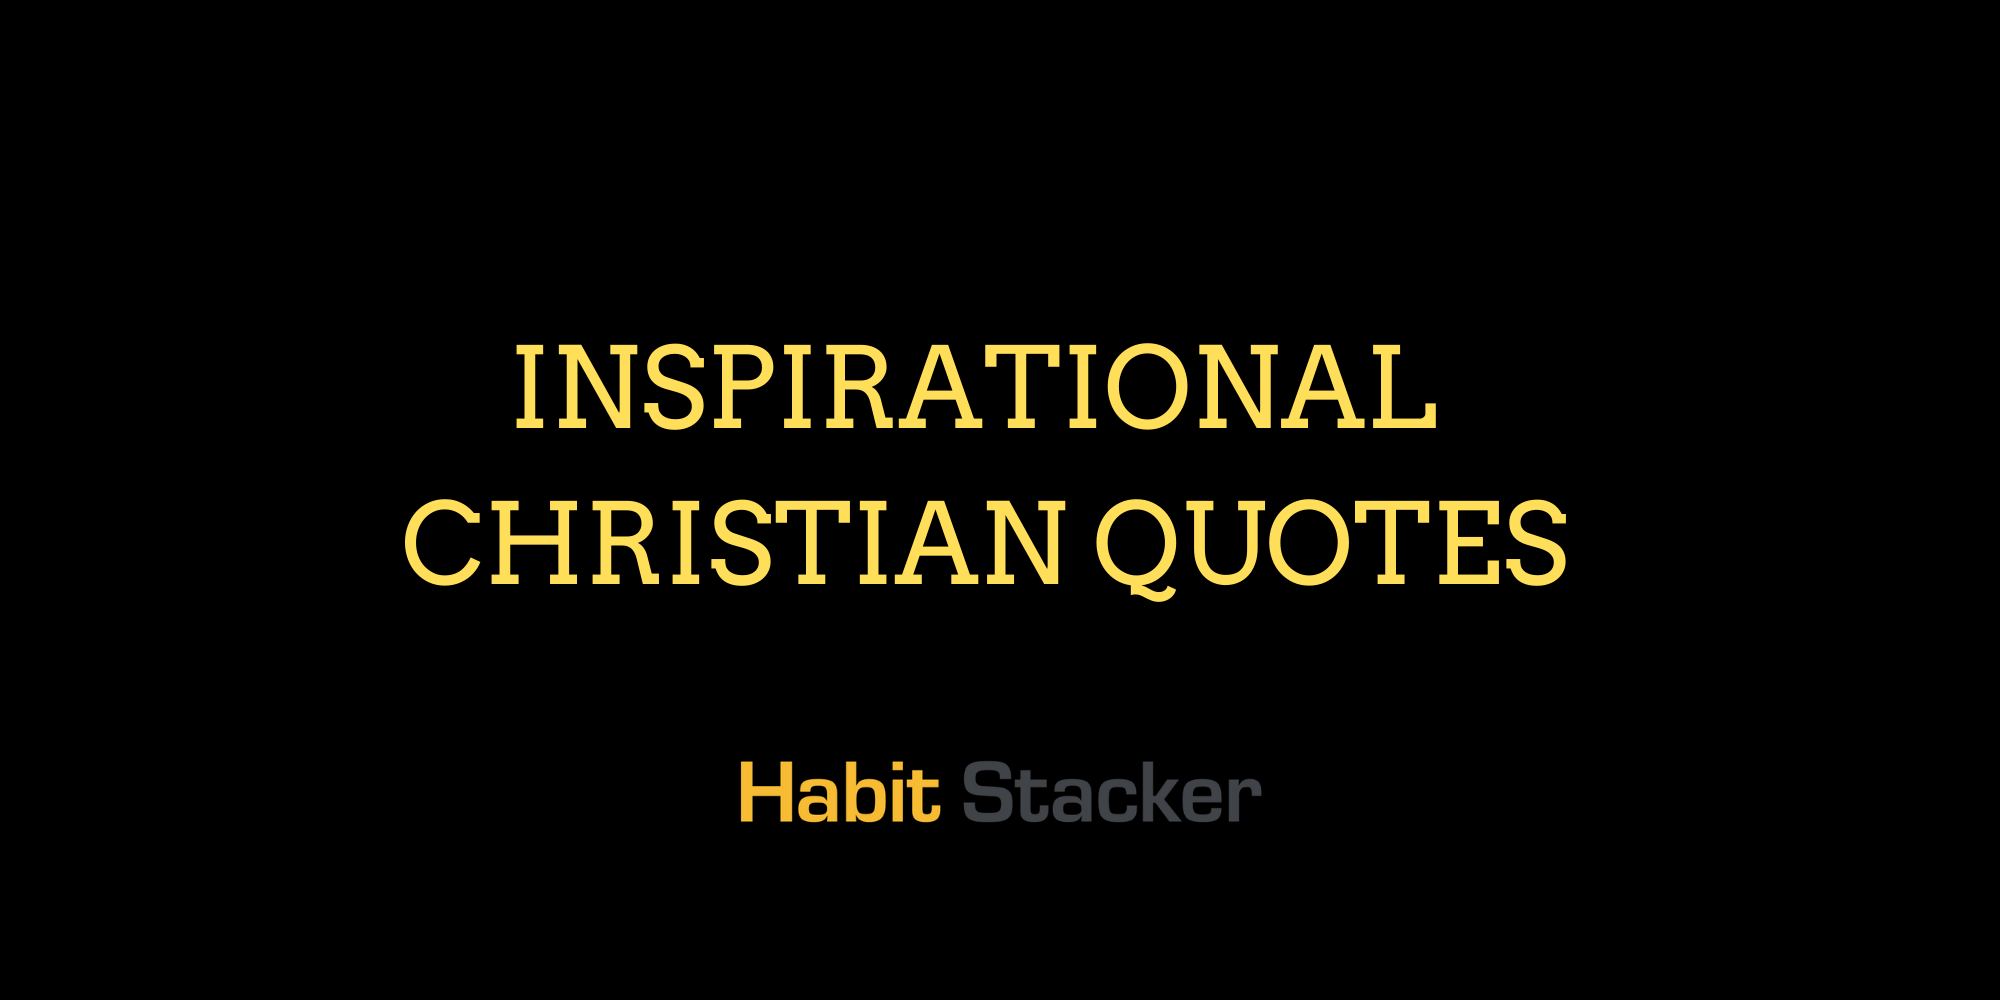 32 Inspirational Christian Quotes That Show The Power of Jesus